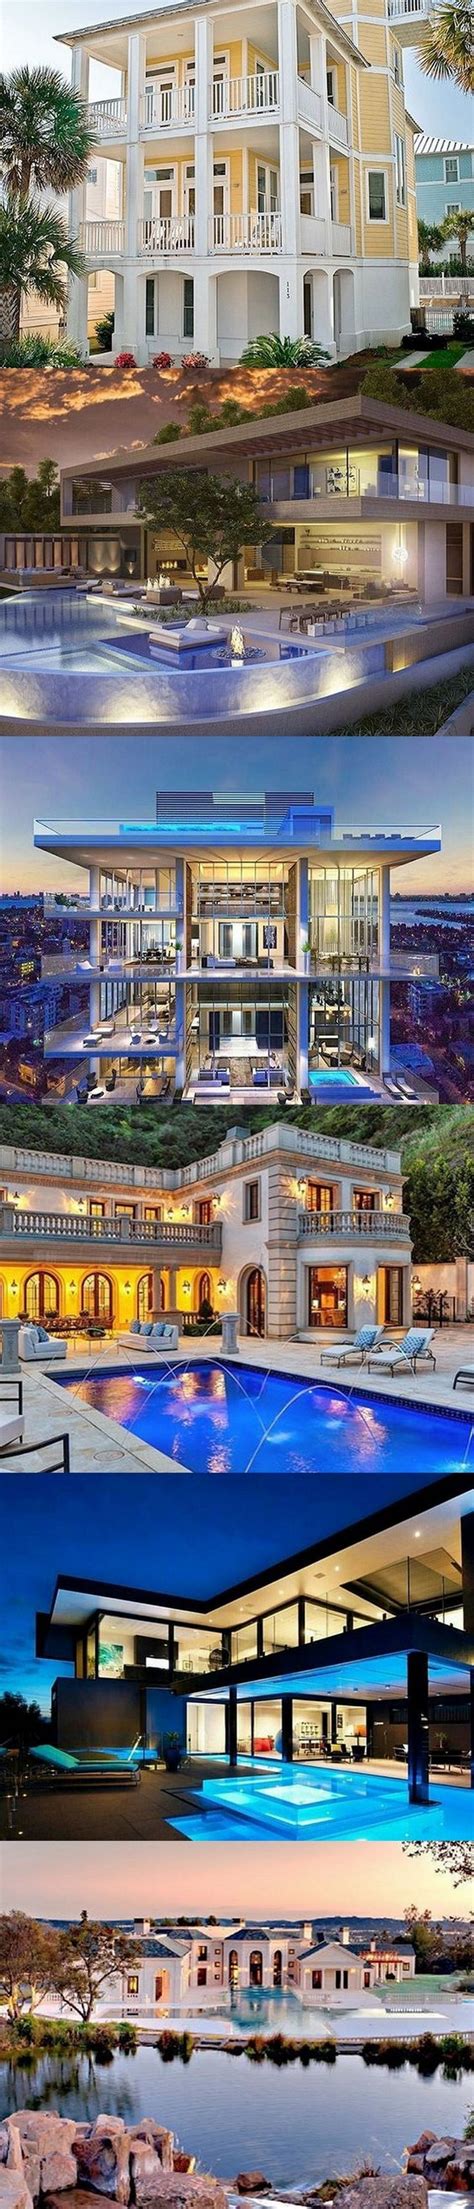 Cool 54 Stunning Dream Homes And Mega Mansions From Social Media